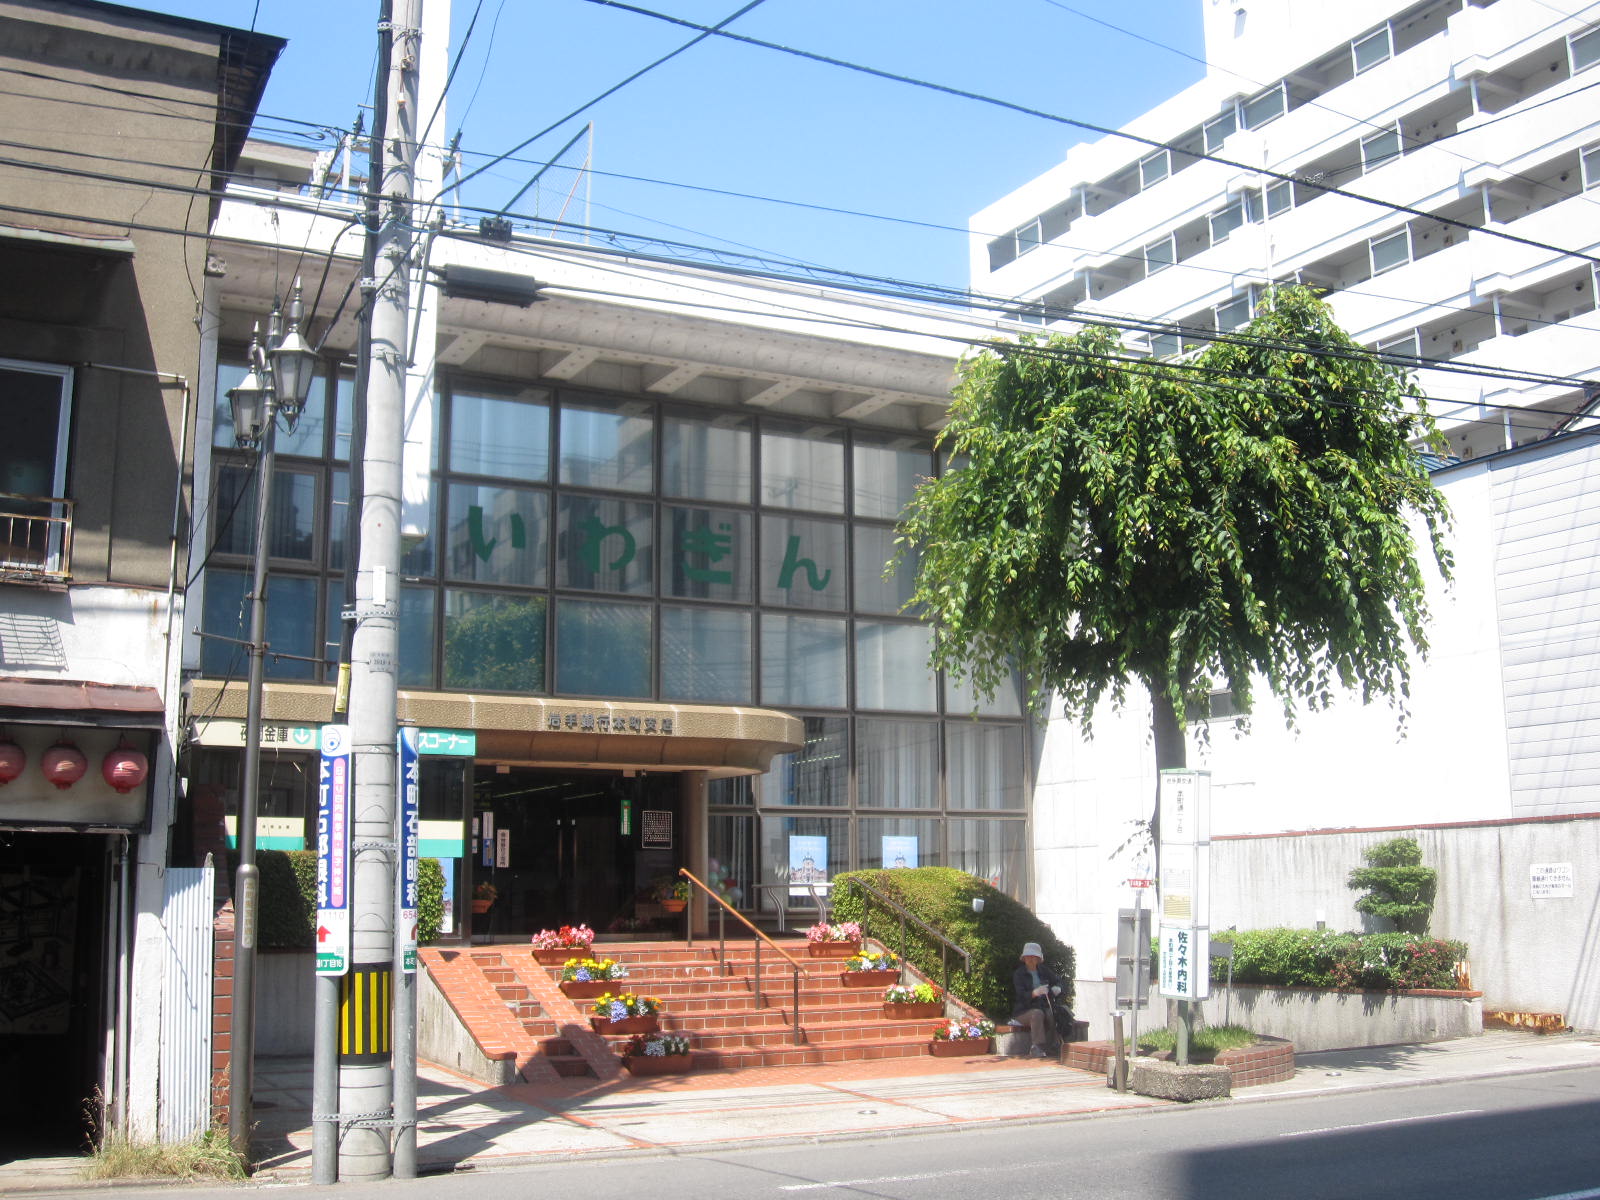 Bank. Iwate Hon 707m to the branch (Bank)